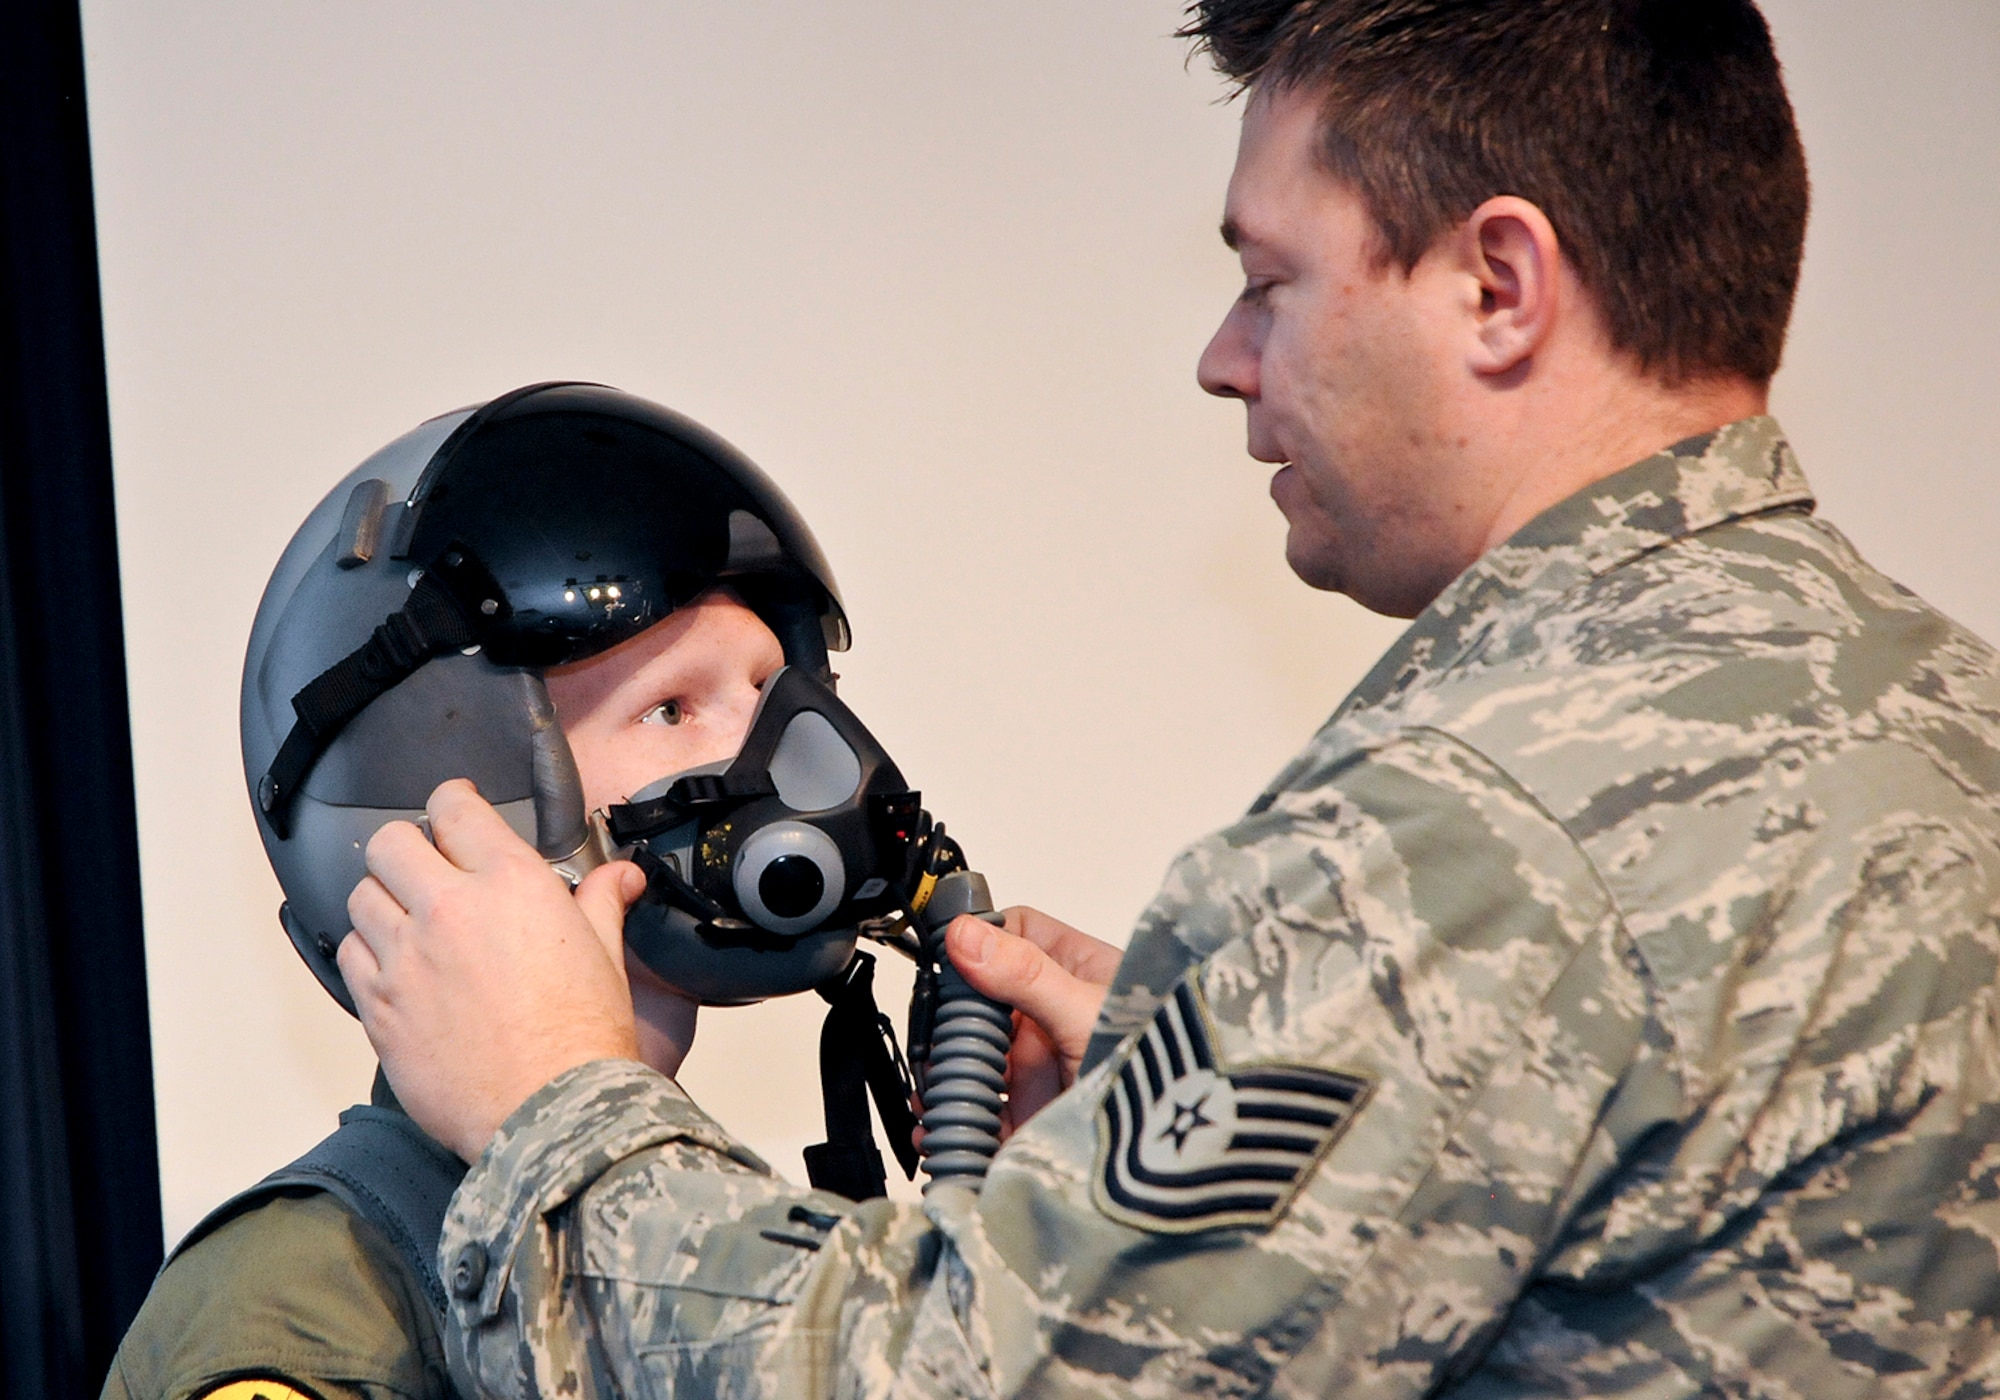 Aircrew Flight Equipment Technician, Tech. Sgt. Craig Michael adjusts a helmet for an honored guest of the 138th Fighter Wing and "pilot for a day" Josh Payton Feb. 19, 2015, at the Tulsa Air National Guard base, Tulsa, Okla.  The pilot for a day program is intended to recognize and honor children with potentially life threatening illnesses and started at the 138th in May 2012, and has hosted seven children since it began.  (U.S. National Guard photo by Senior Master Sgt.  Preston L. Chasteen/Released)